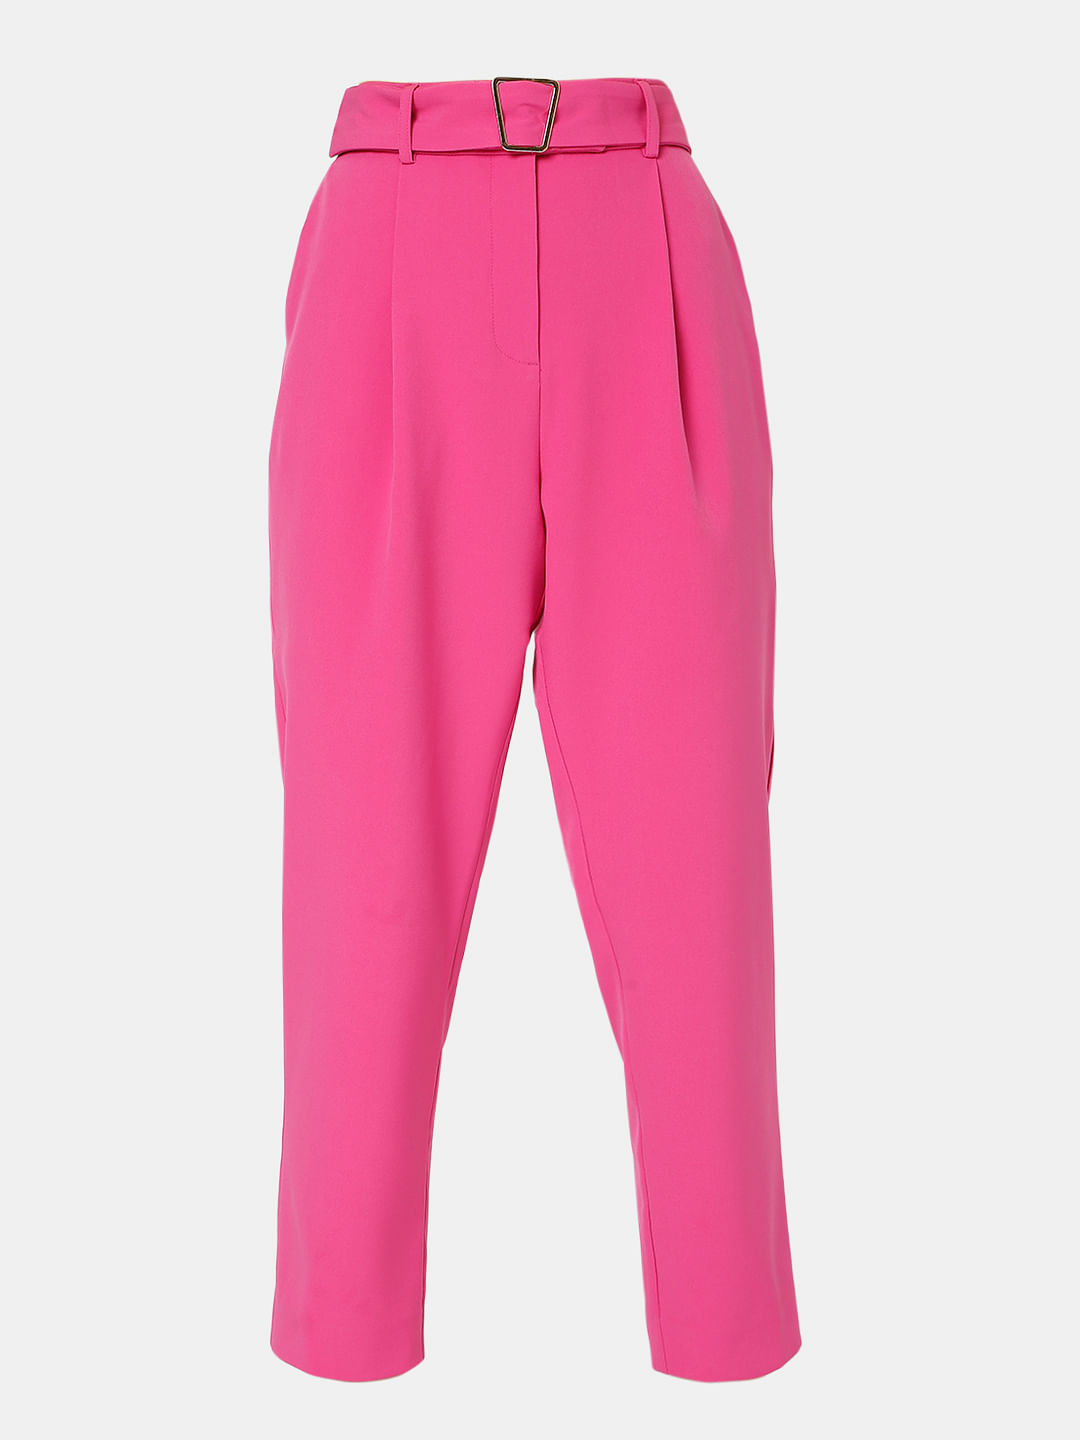 Buy KRAUS Baby Pink Solid Regular Fit Blended Fabric Women's Casual Wear  Pant | Shoppers Stop